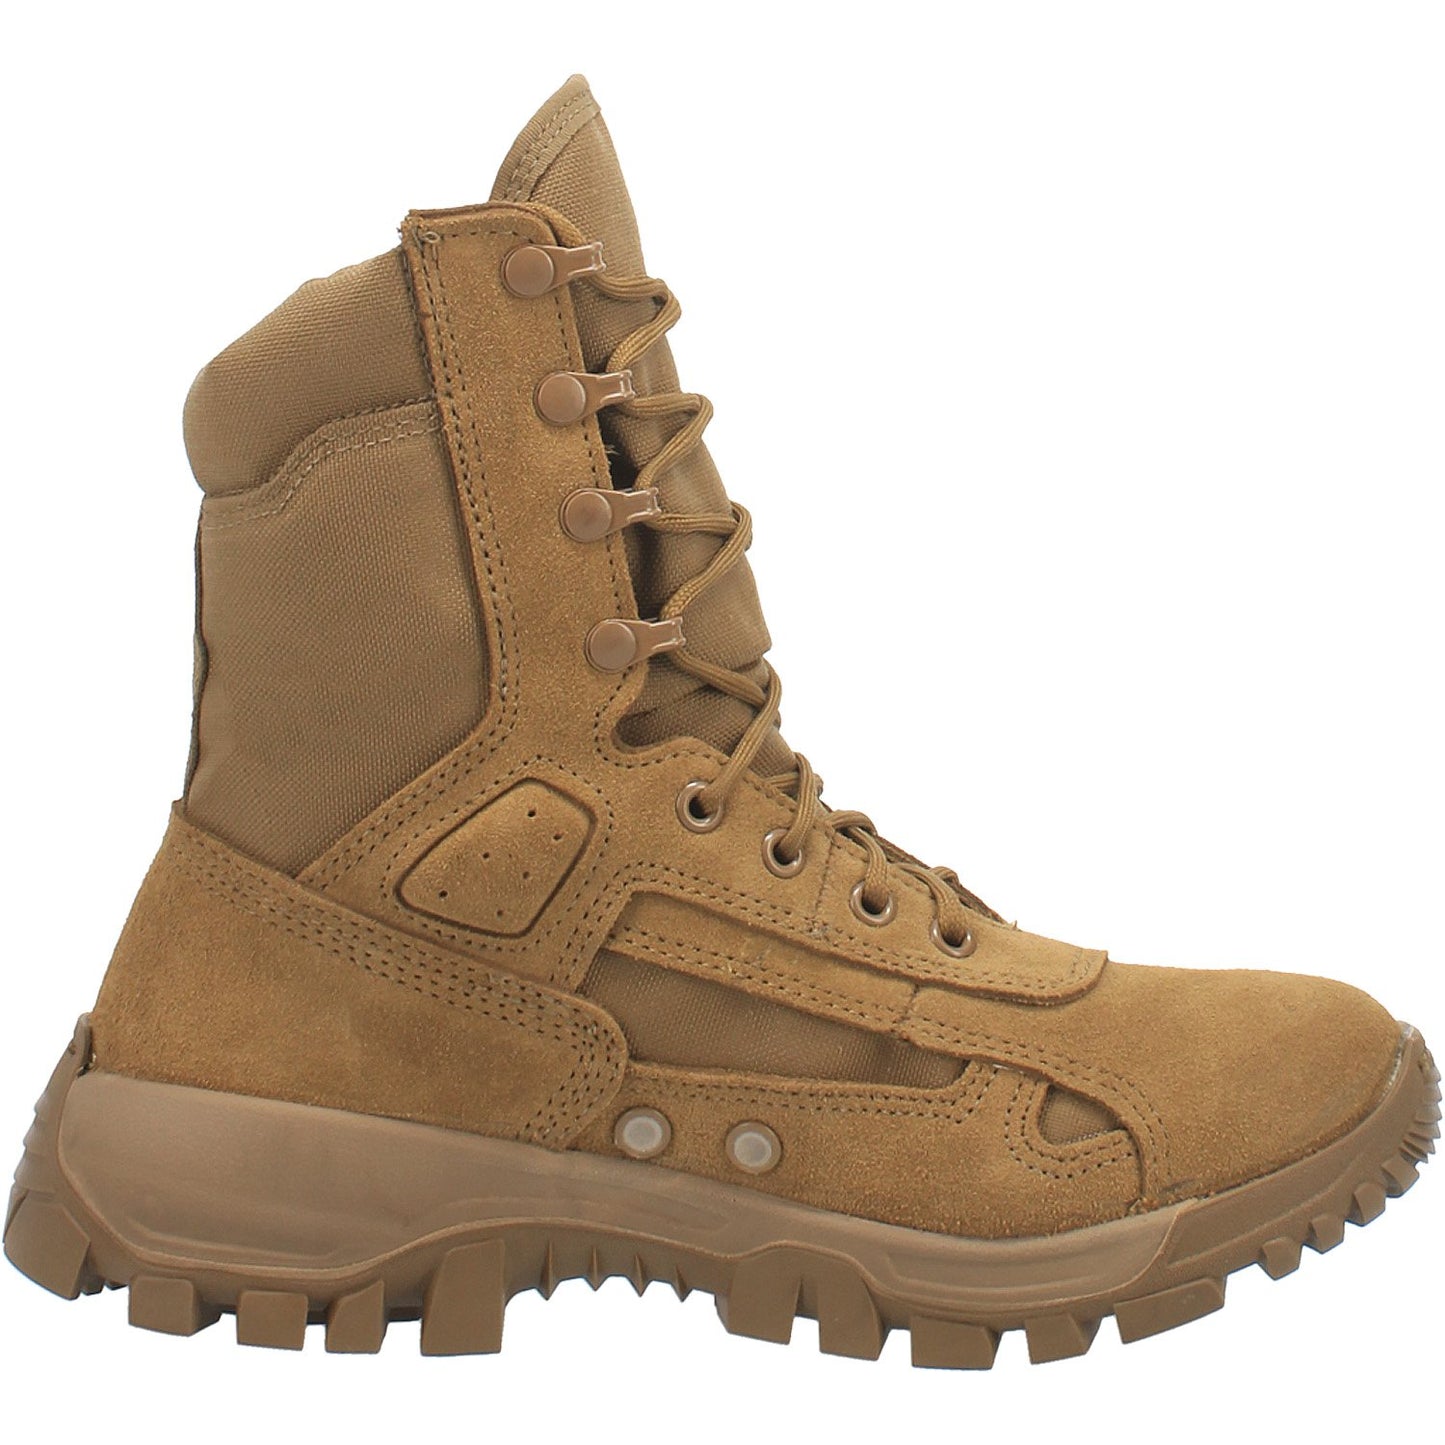 MCRAE Terassault T1 Hot Weather Leather Coyote Combat Boots